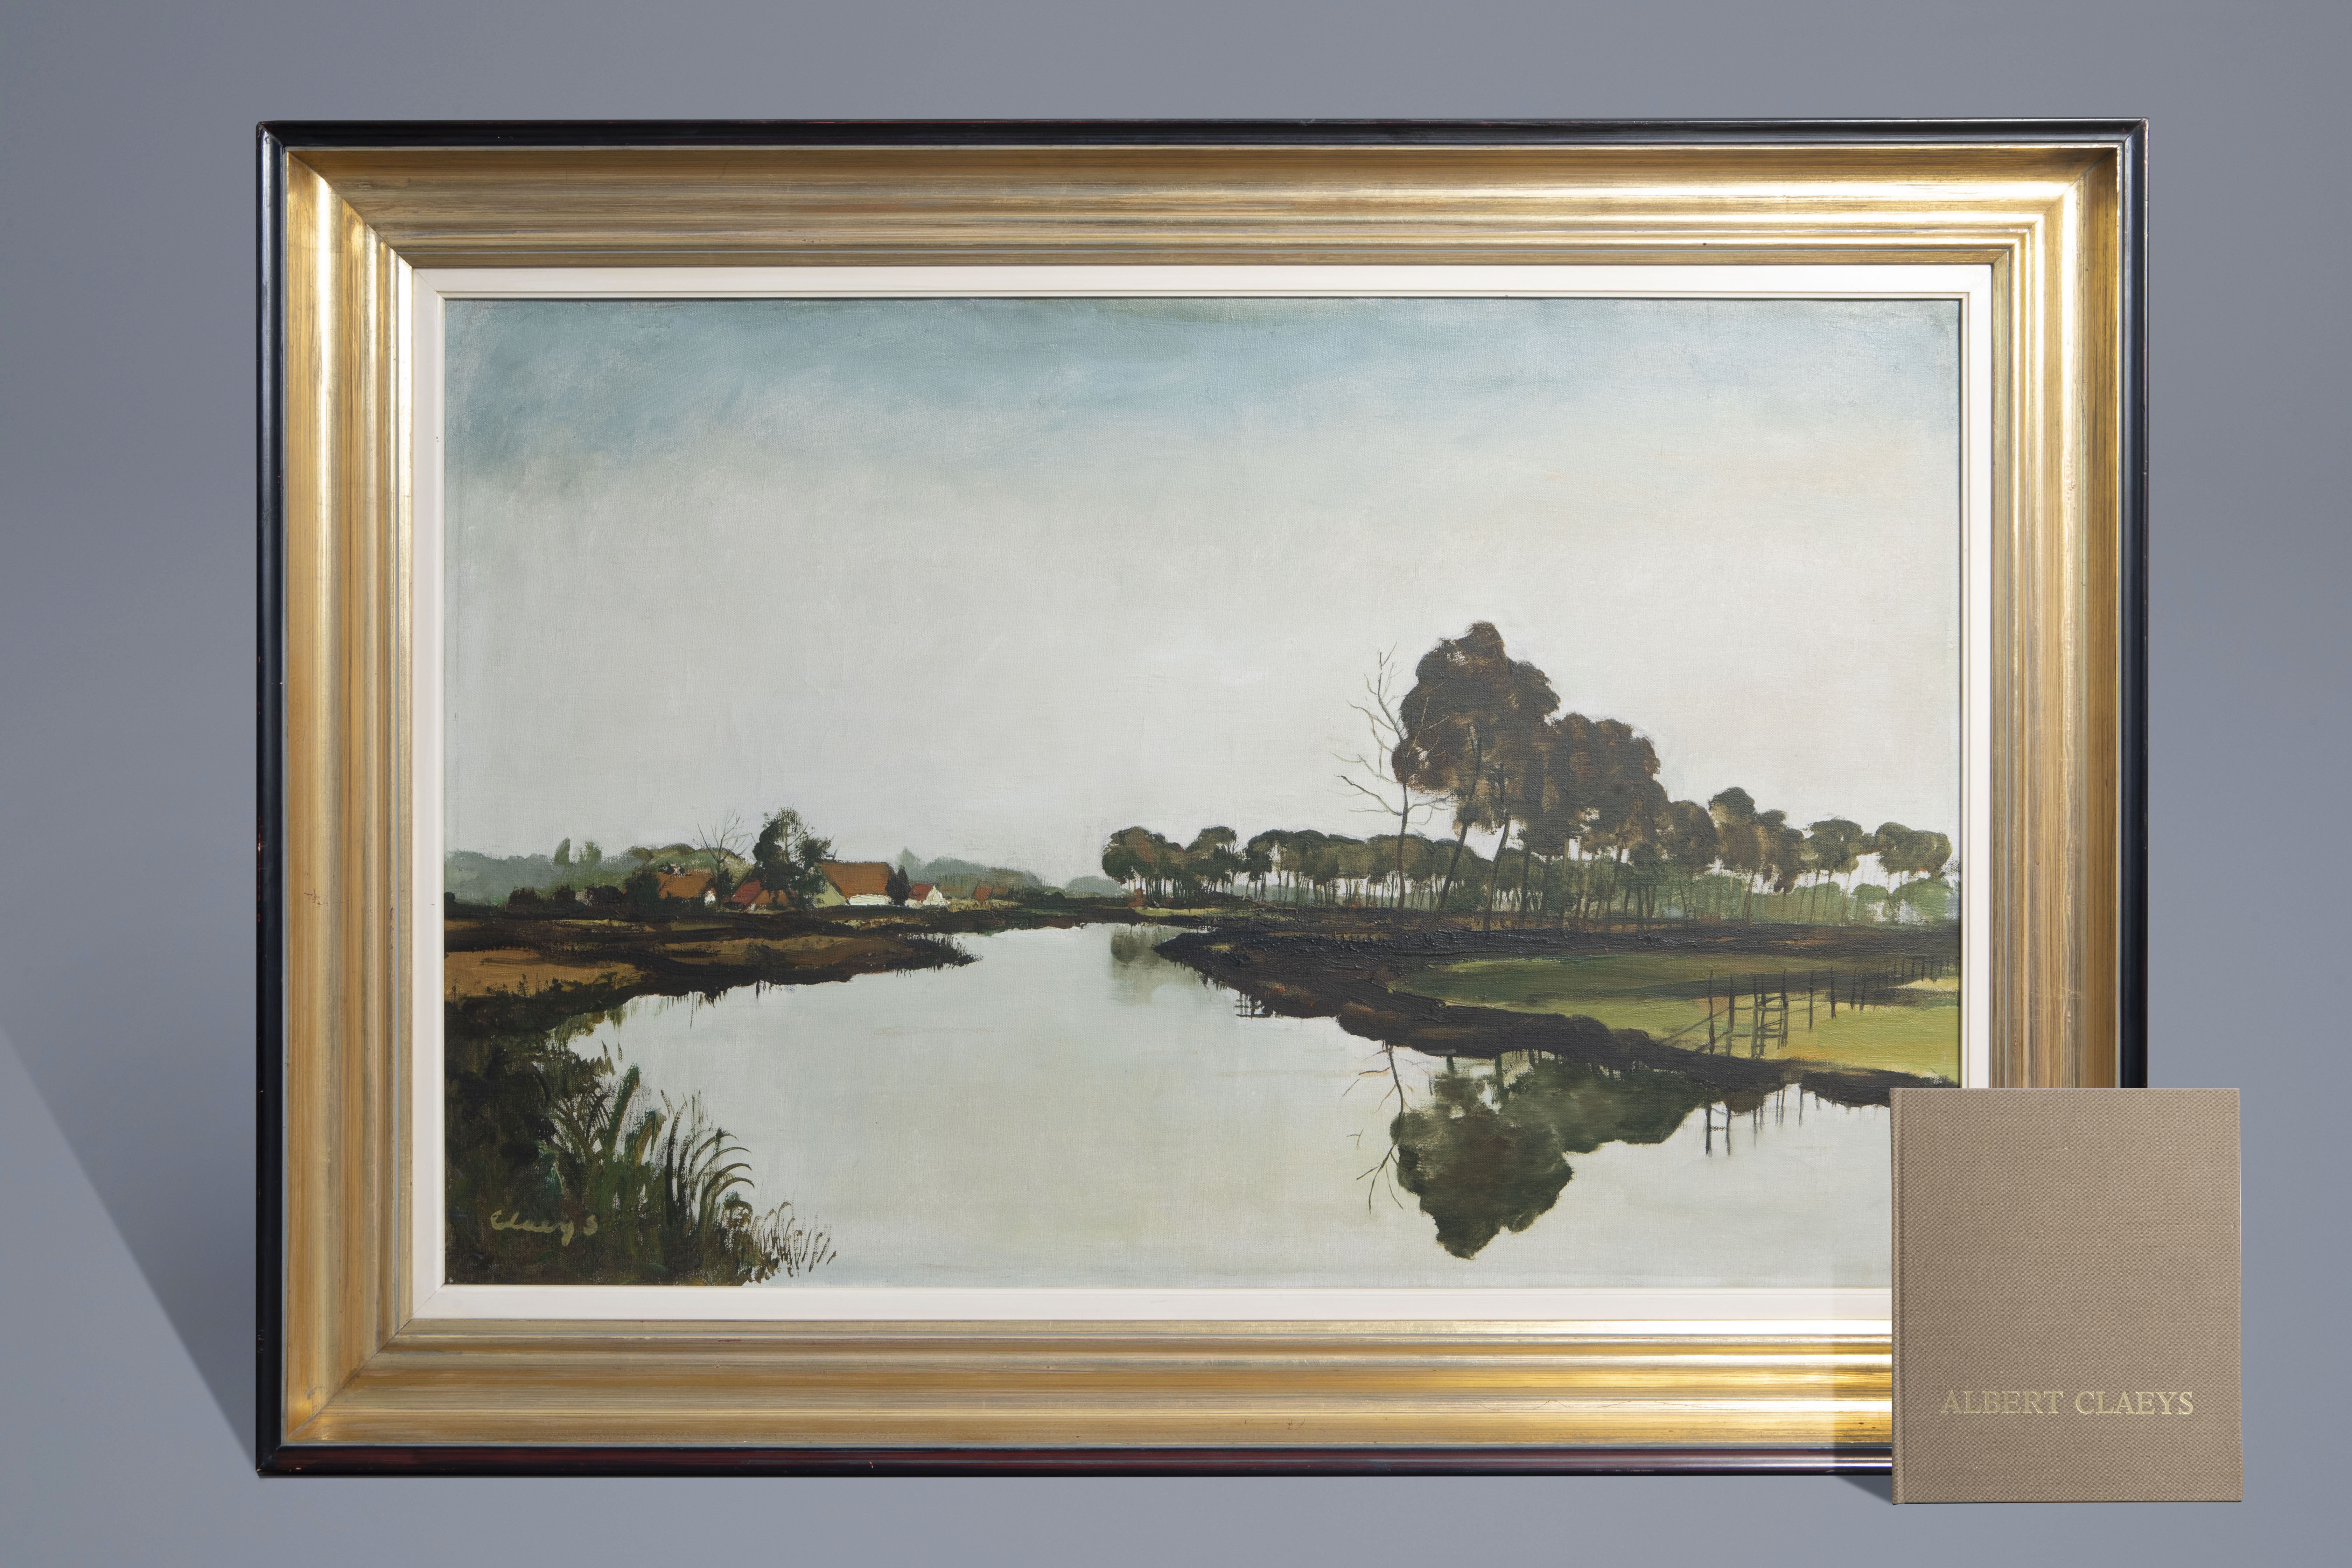 Albert Claeys (1889-1967): A Leie landscape, oil on canvas, with accompanying monograph - Image 2 of 7